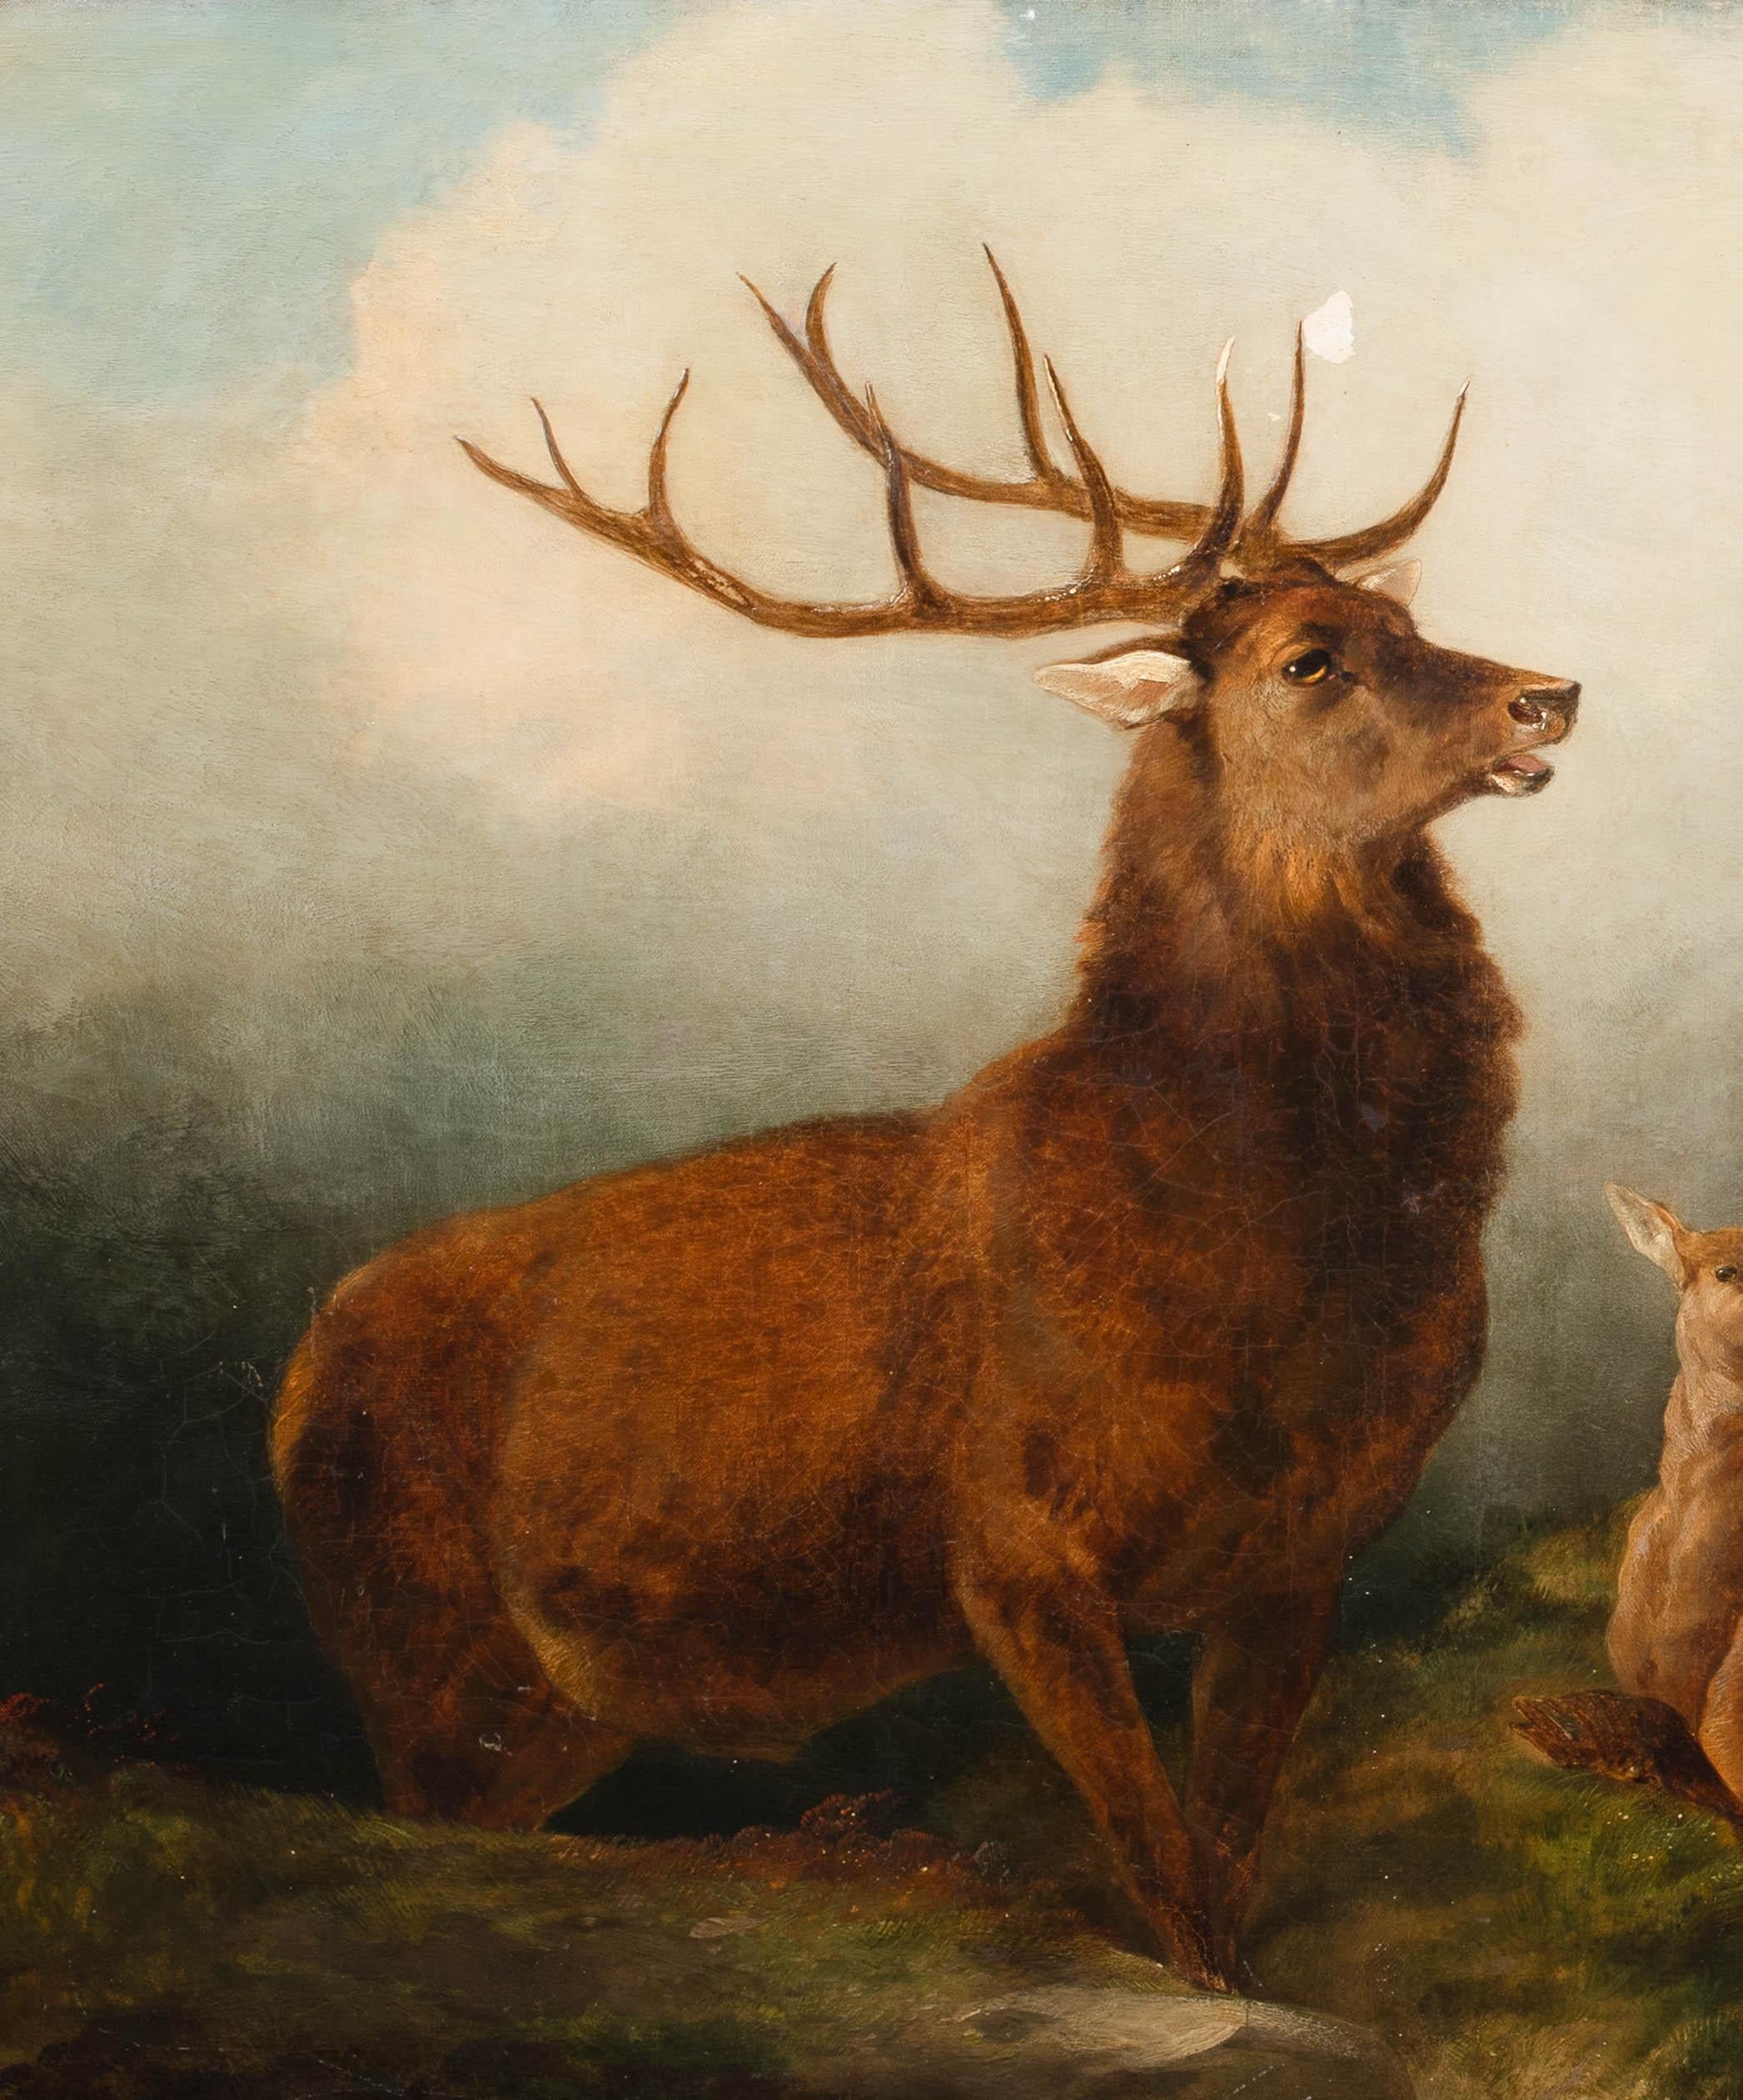 The Monarch Of The Glen, 19th Century

by John W Morris (1865-1924)

Huge 19th Century Scottish Highland scene of a stag, deer and fawns, oil on canvas by John W Morris. Large expensive Highland scane of a family of deer with the stag in the